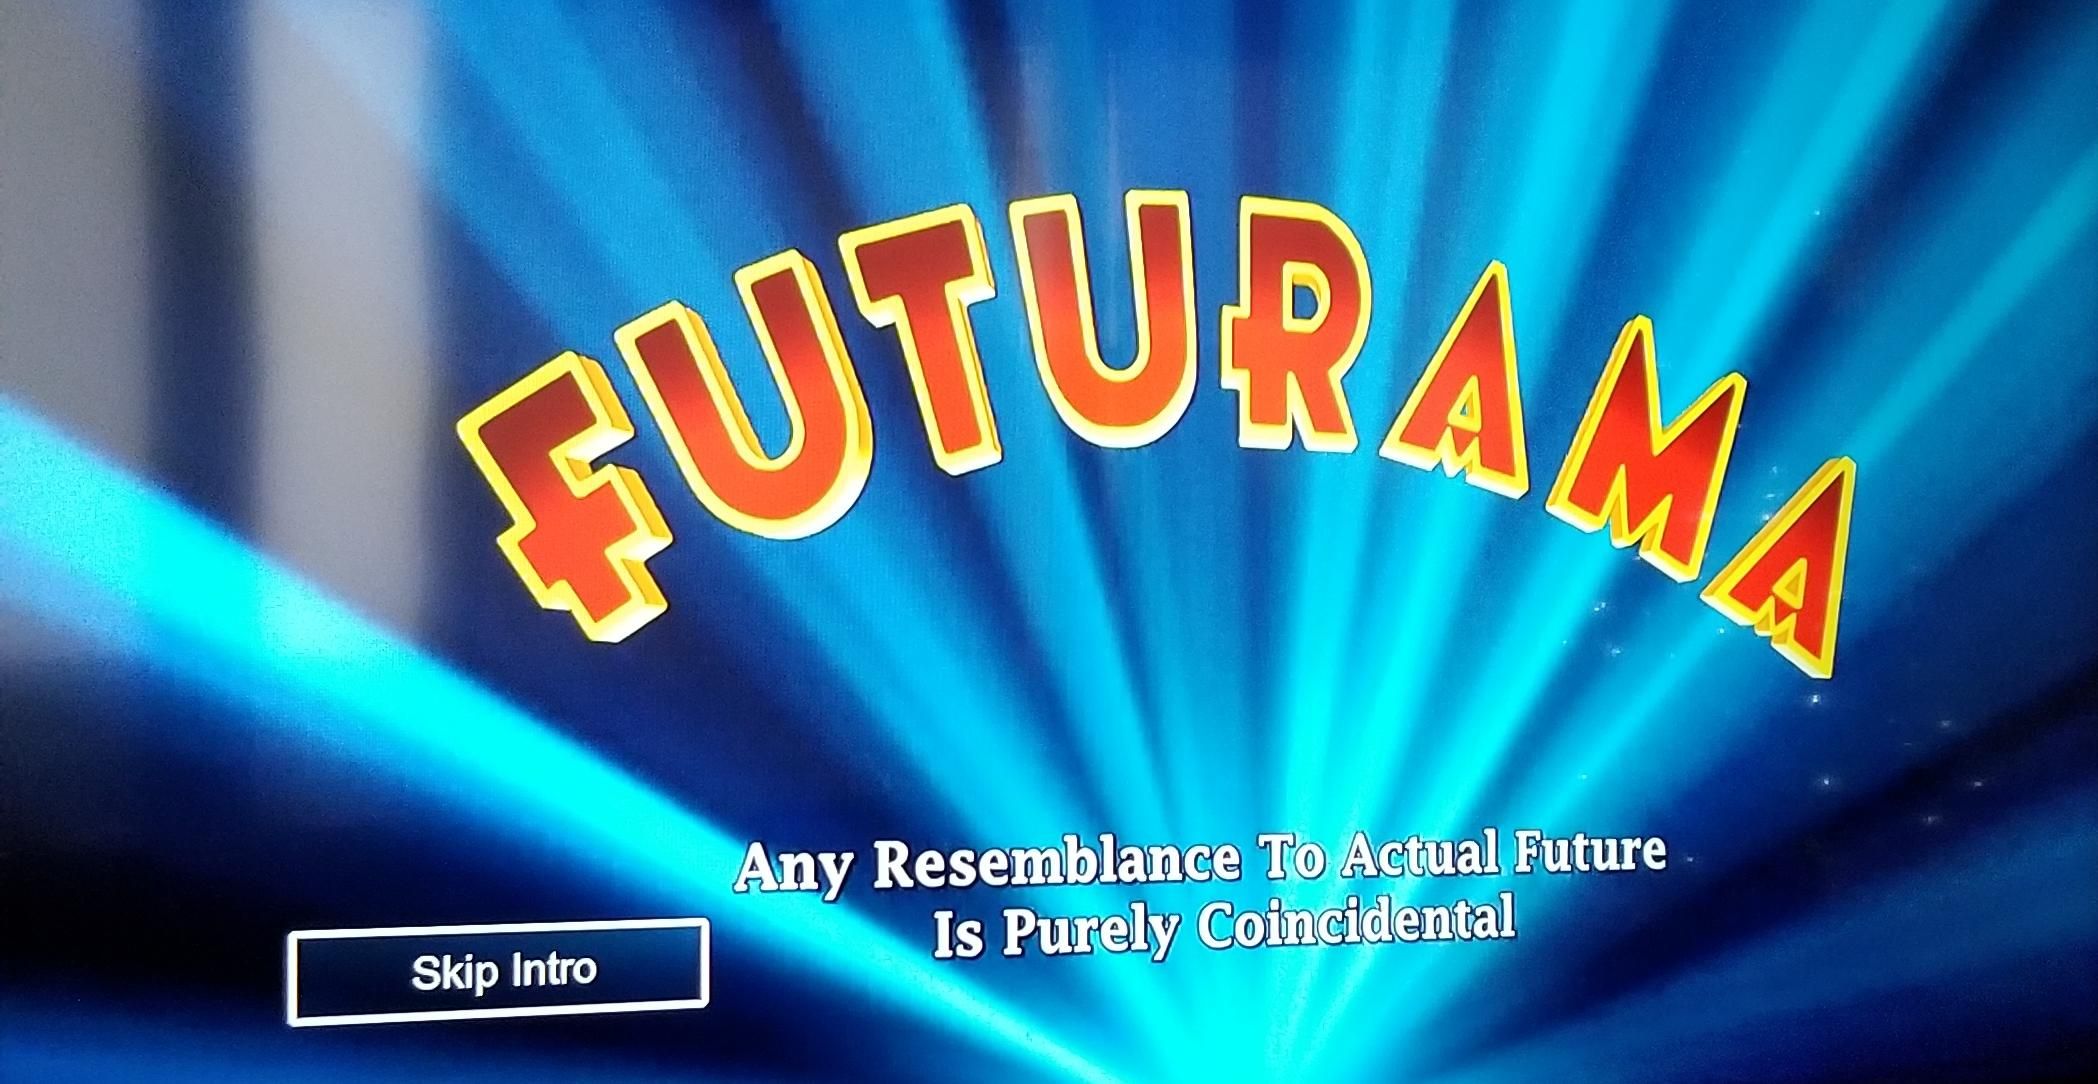 Everyone's on to the Simpson's telling the Future so Futurama is covering there ass